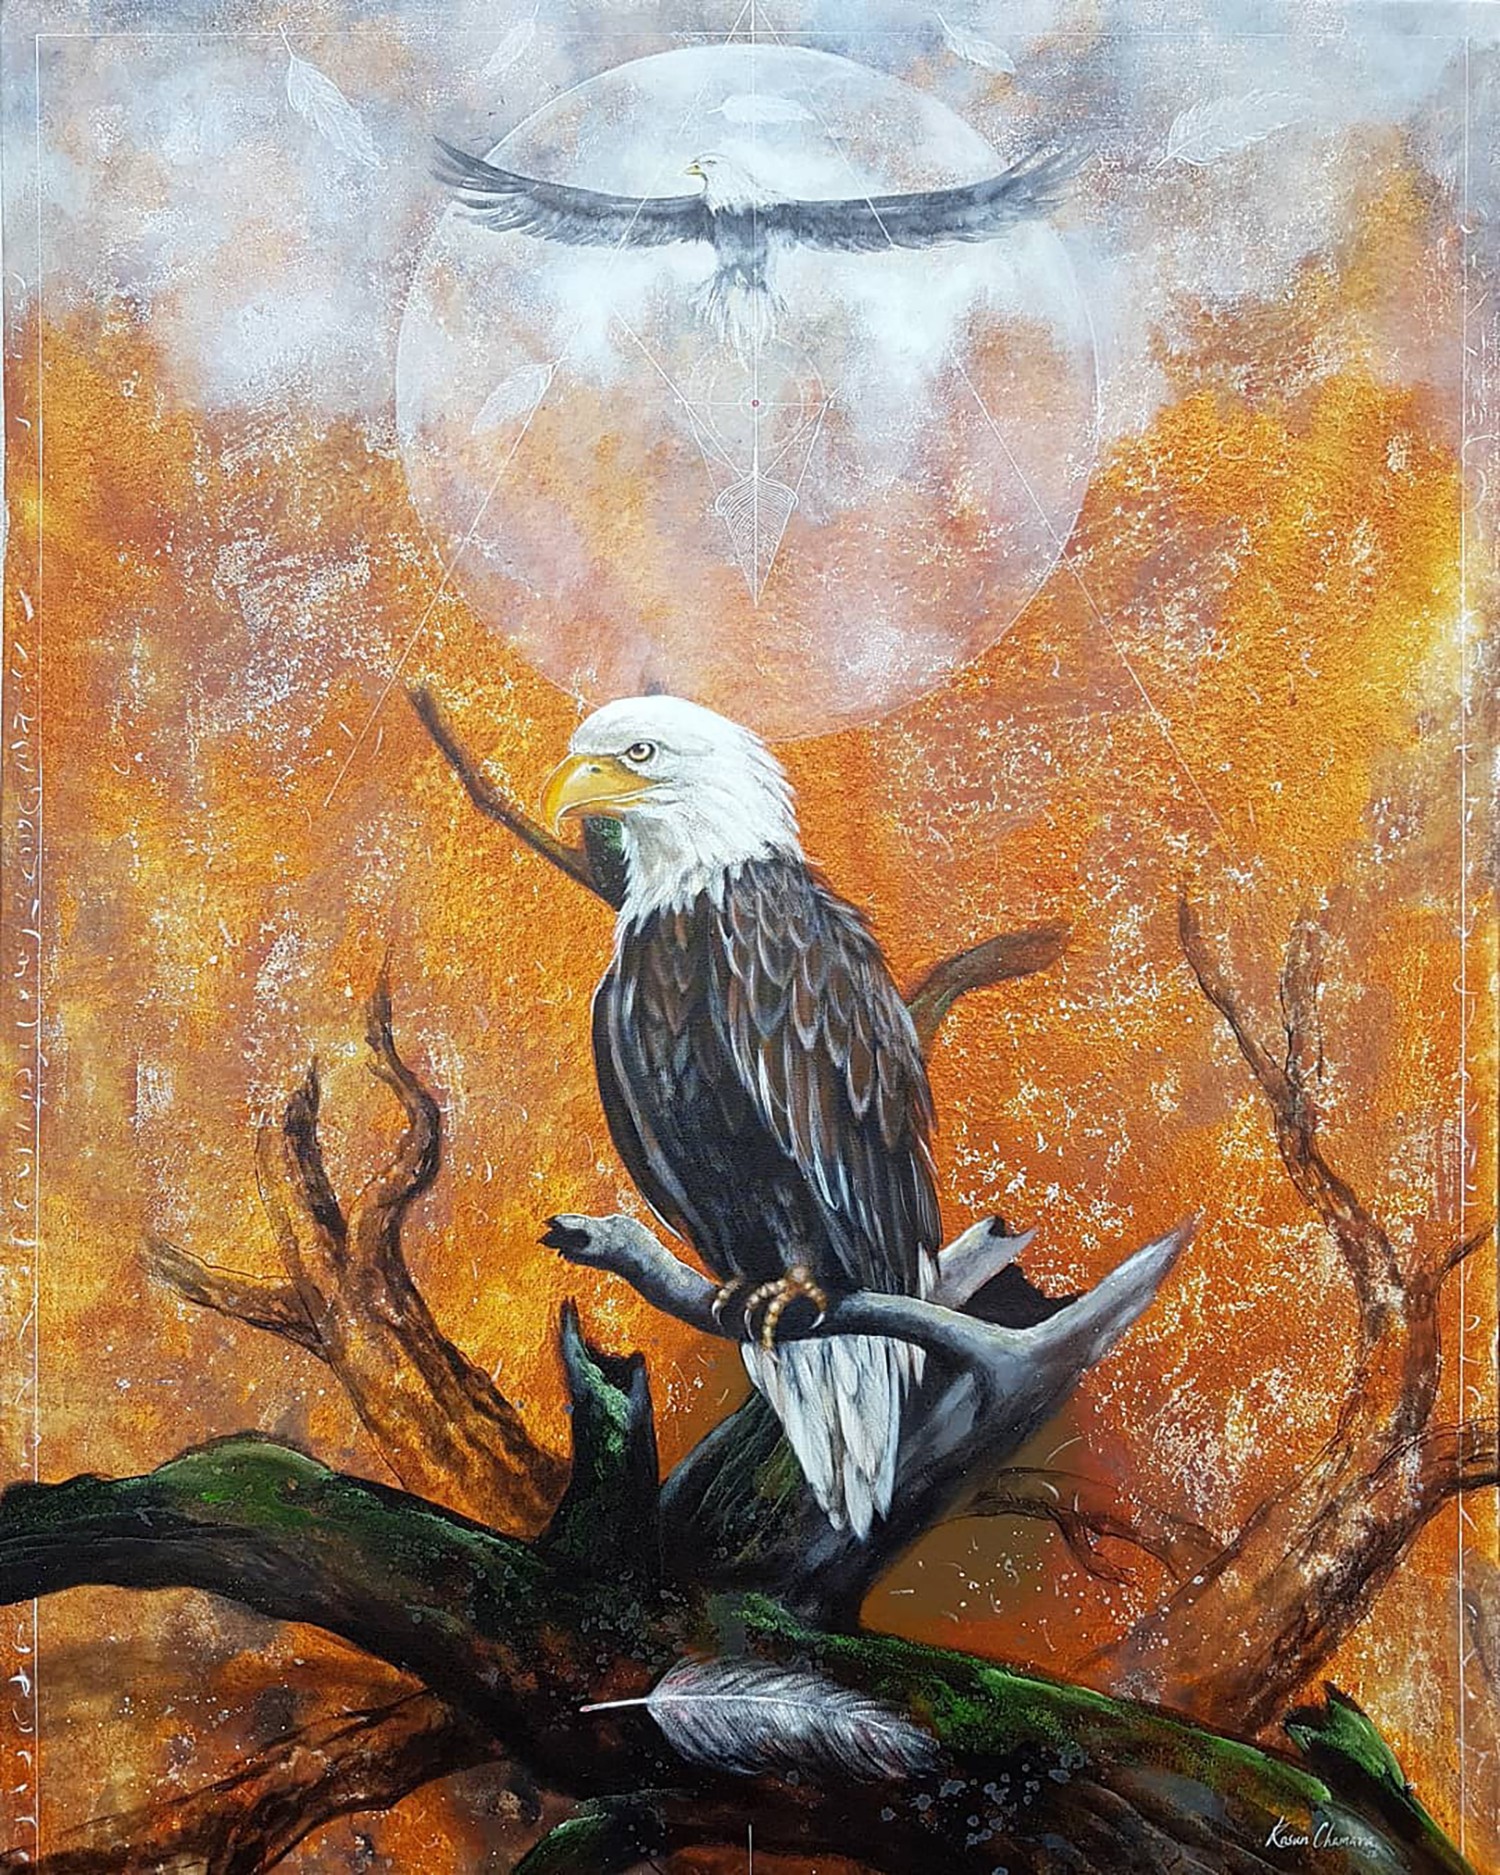 Eagle in Geometric Composition by kasun chamara wickramasinghe